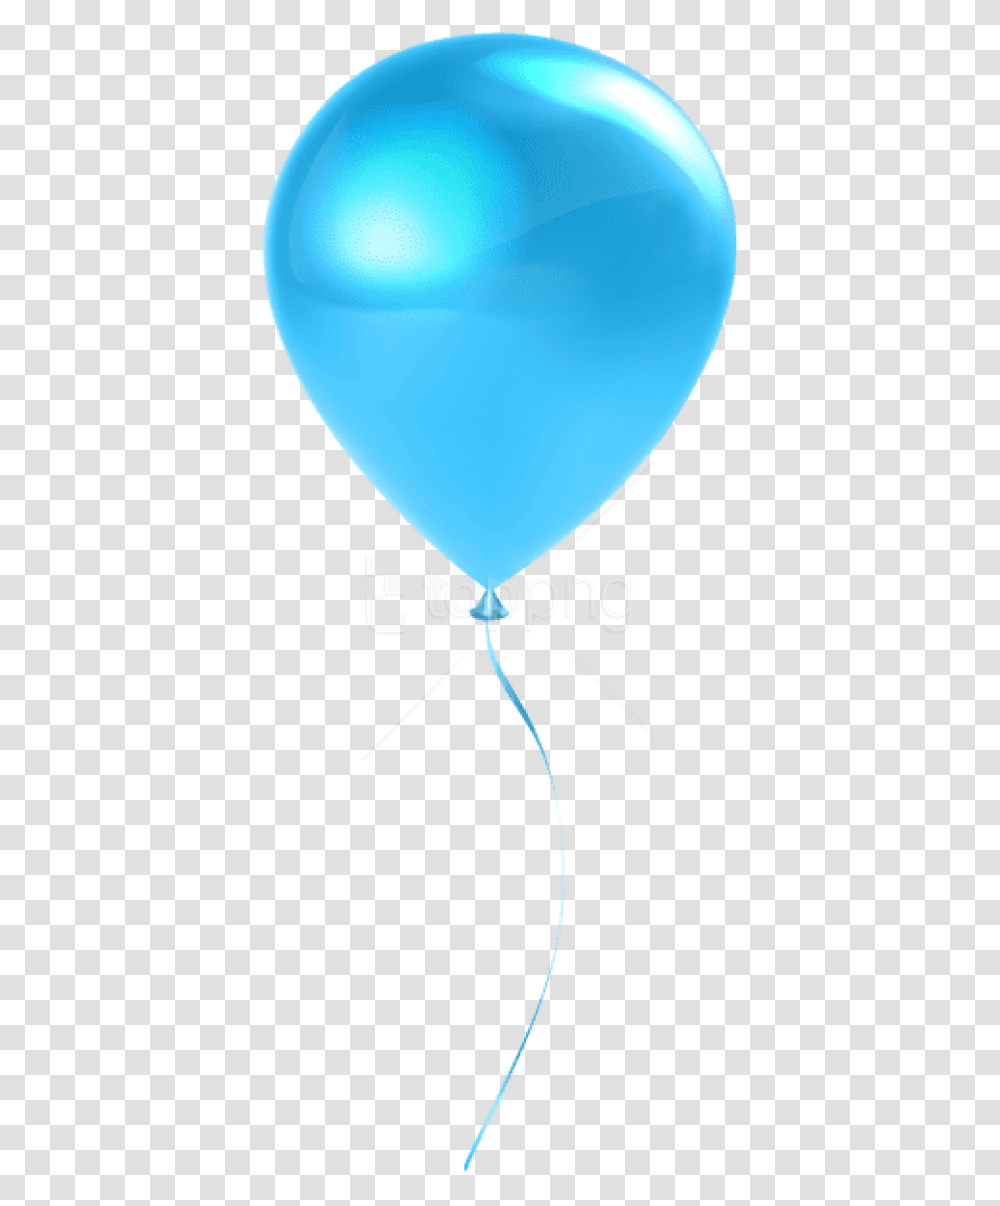 Single Balloon Background Blue Balloons Transparent Png